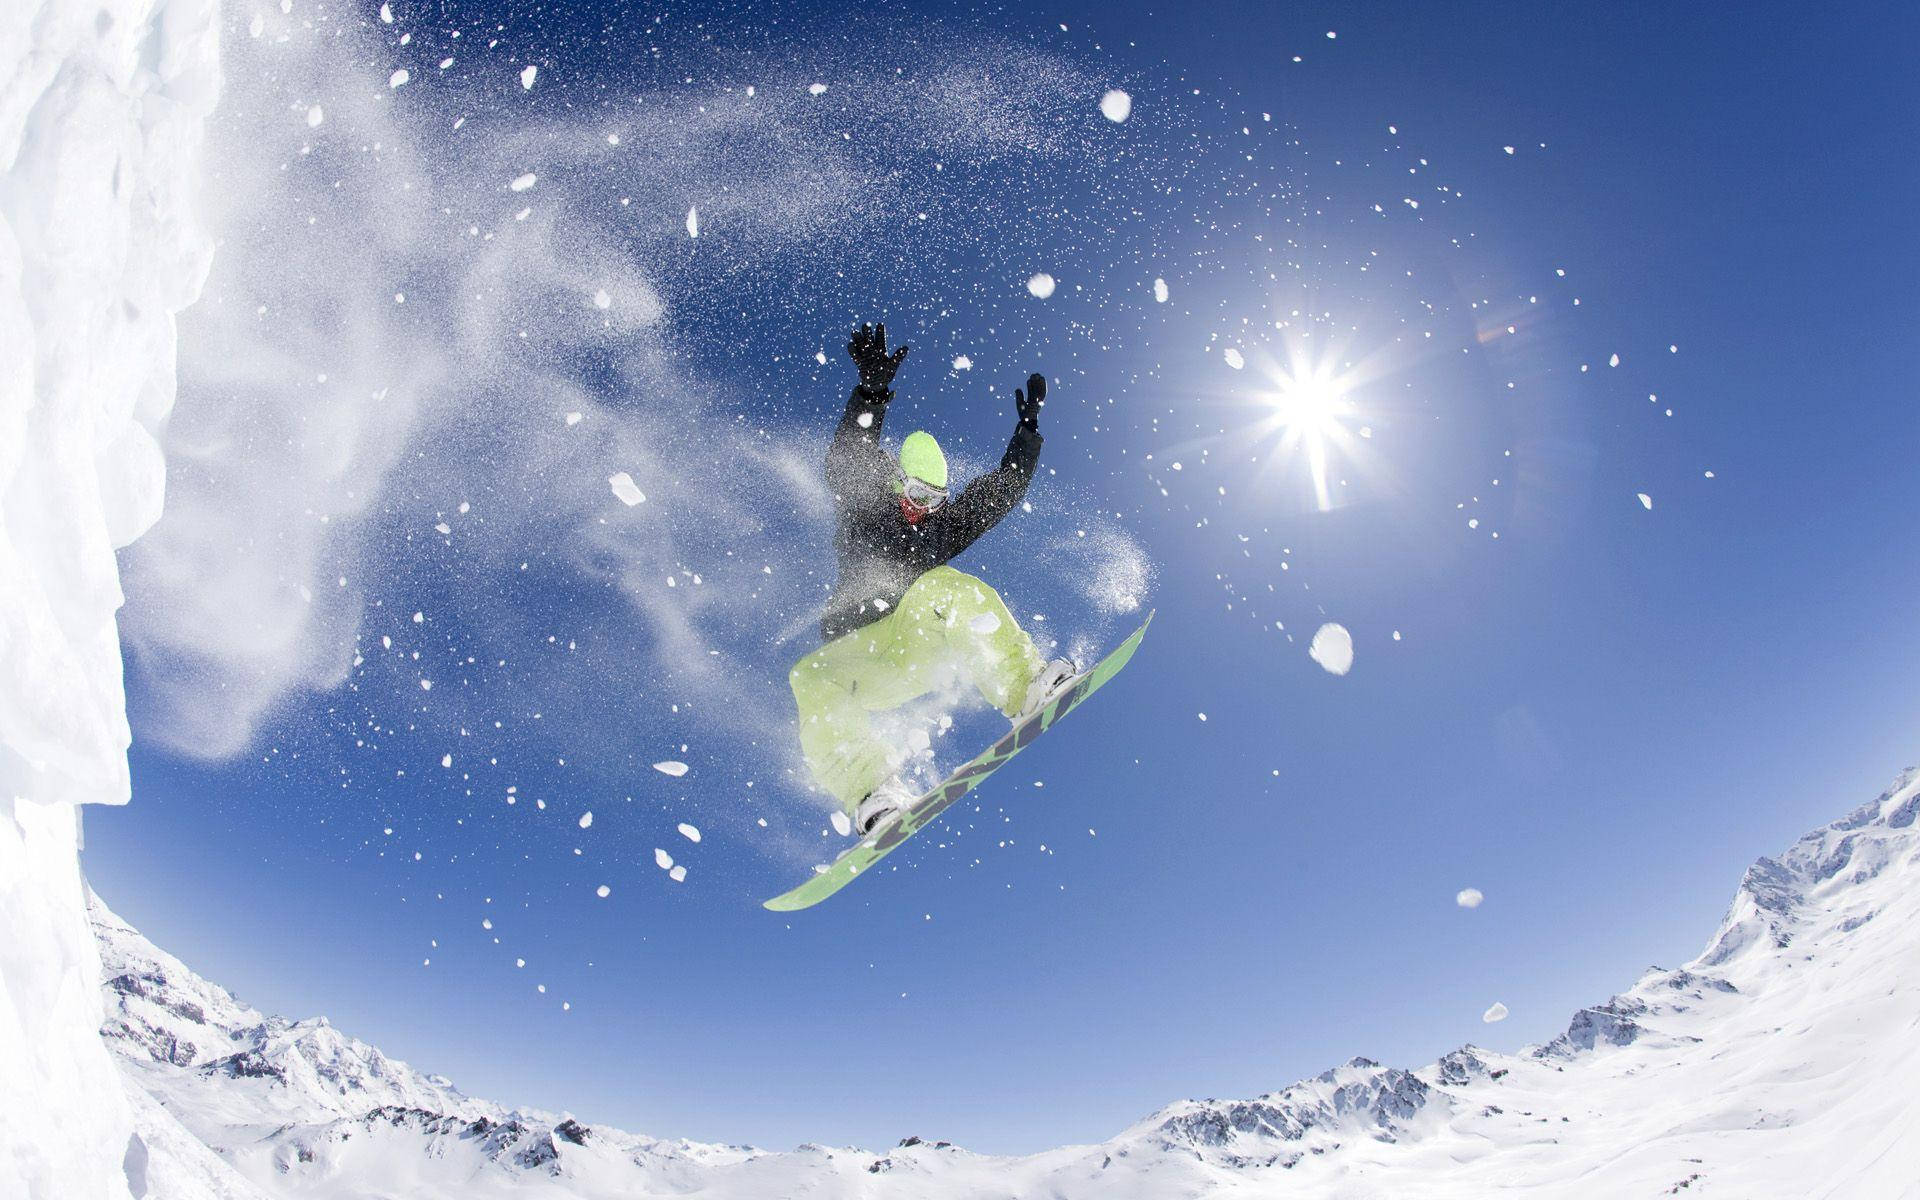 Man With Snowboard Posing Mid-Trick Wallpaper